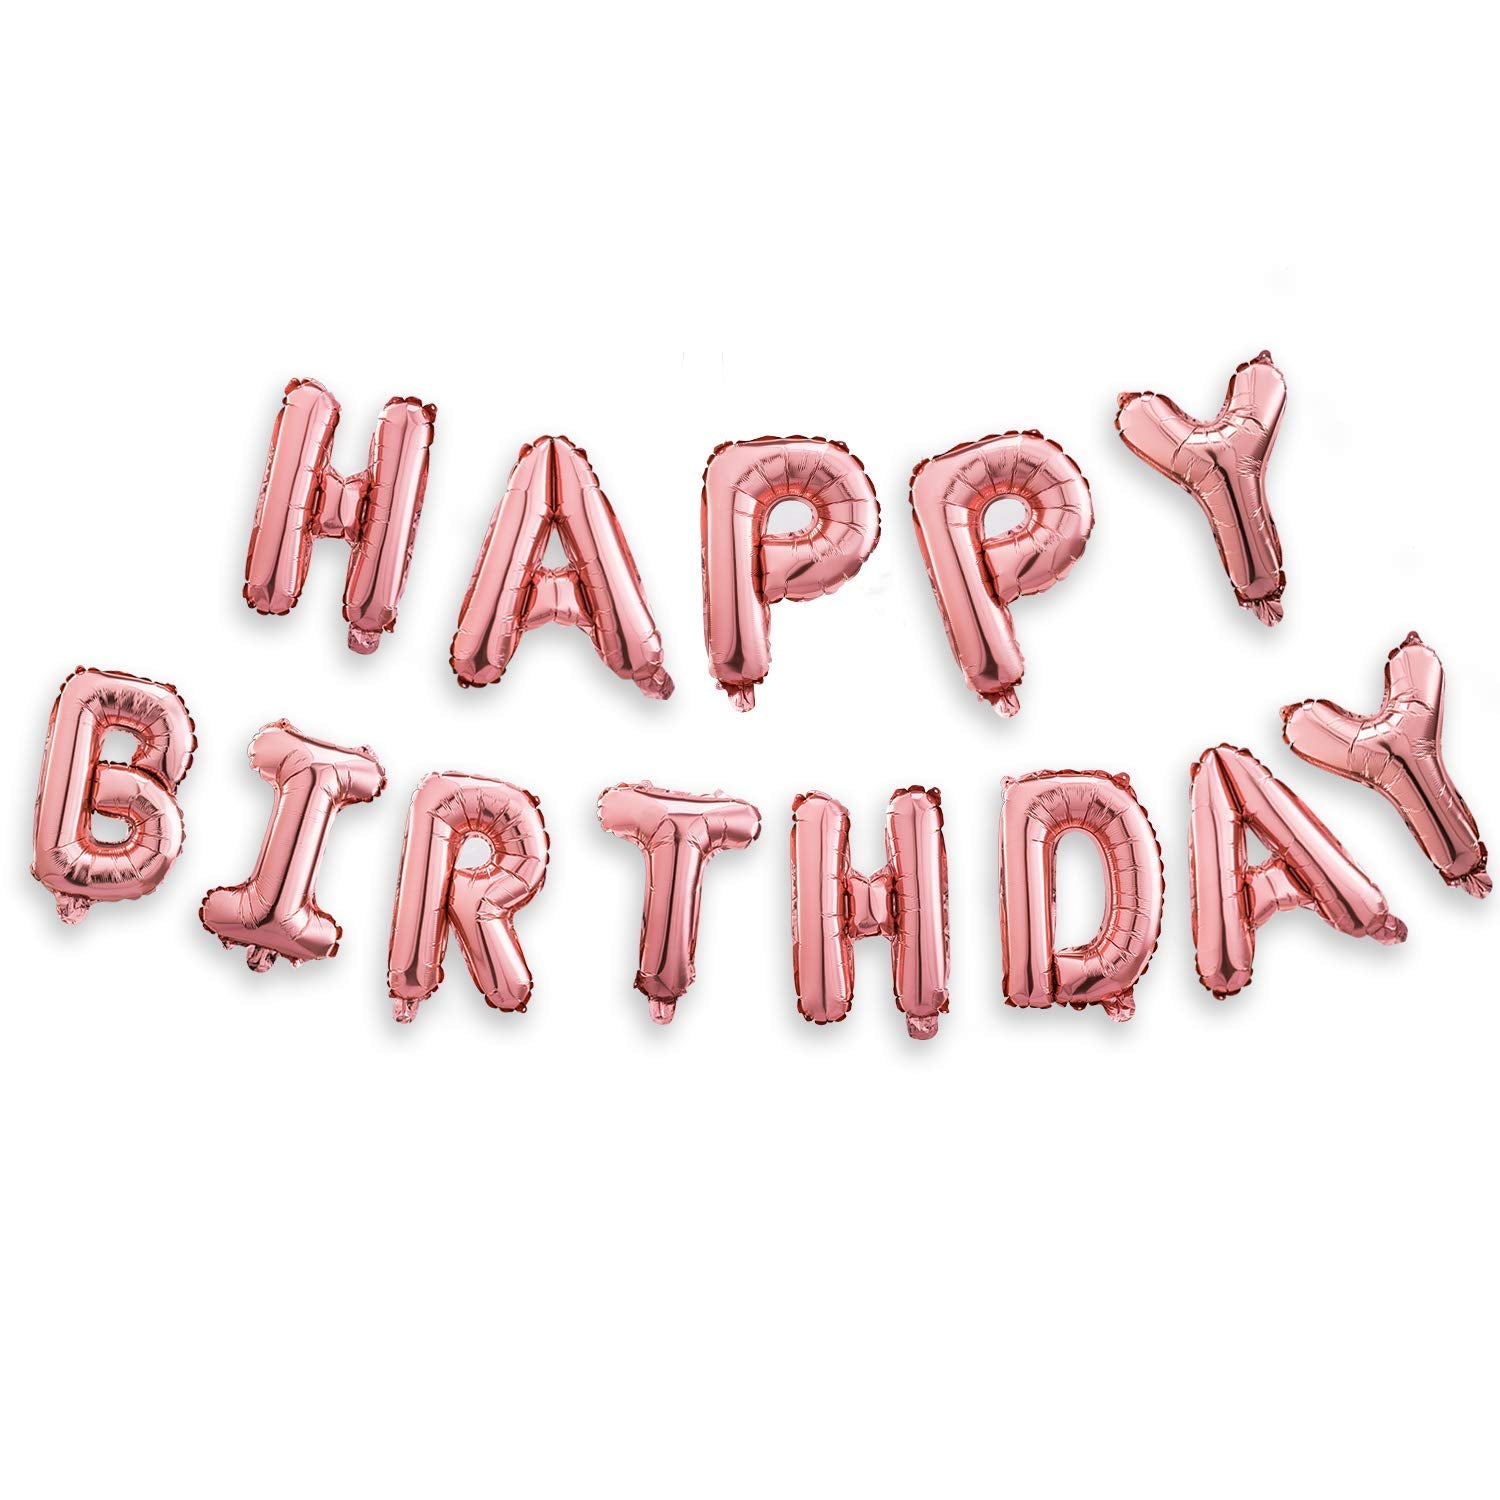 Happy Birthday Banner (3D Gold Lettering) Mylar Foil Letters | Inflatable Party Decor and Event Decorations for Kids and Adults | Reusable, Ecofriendly Fun